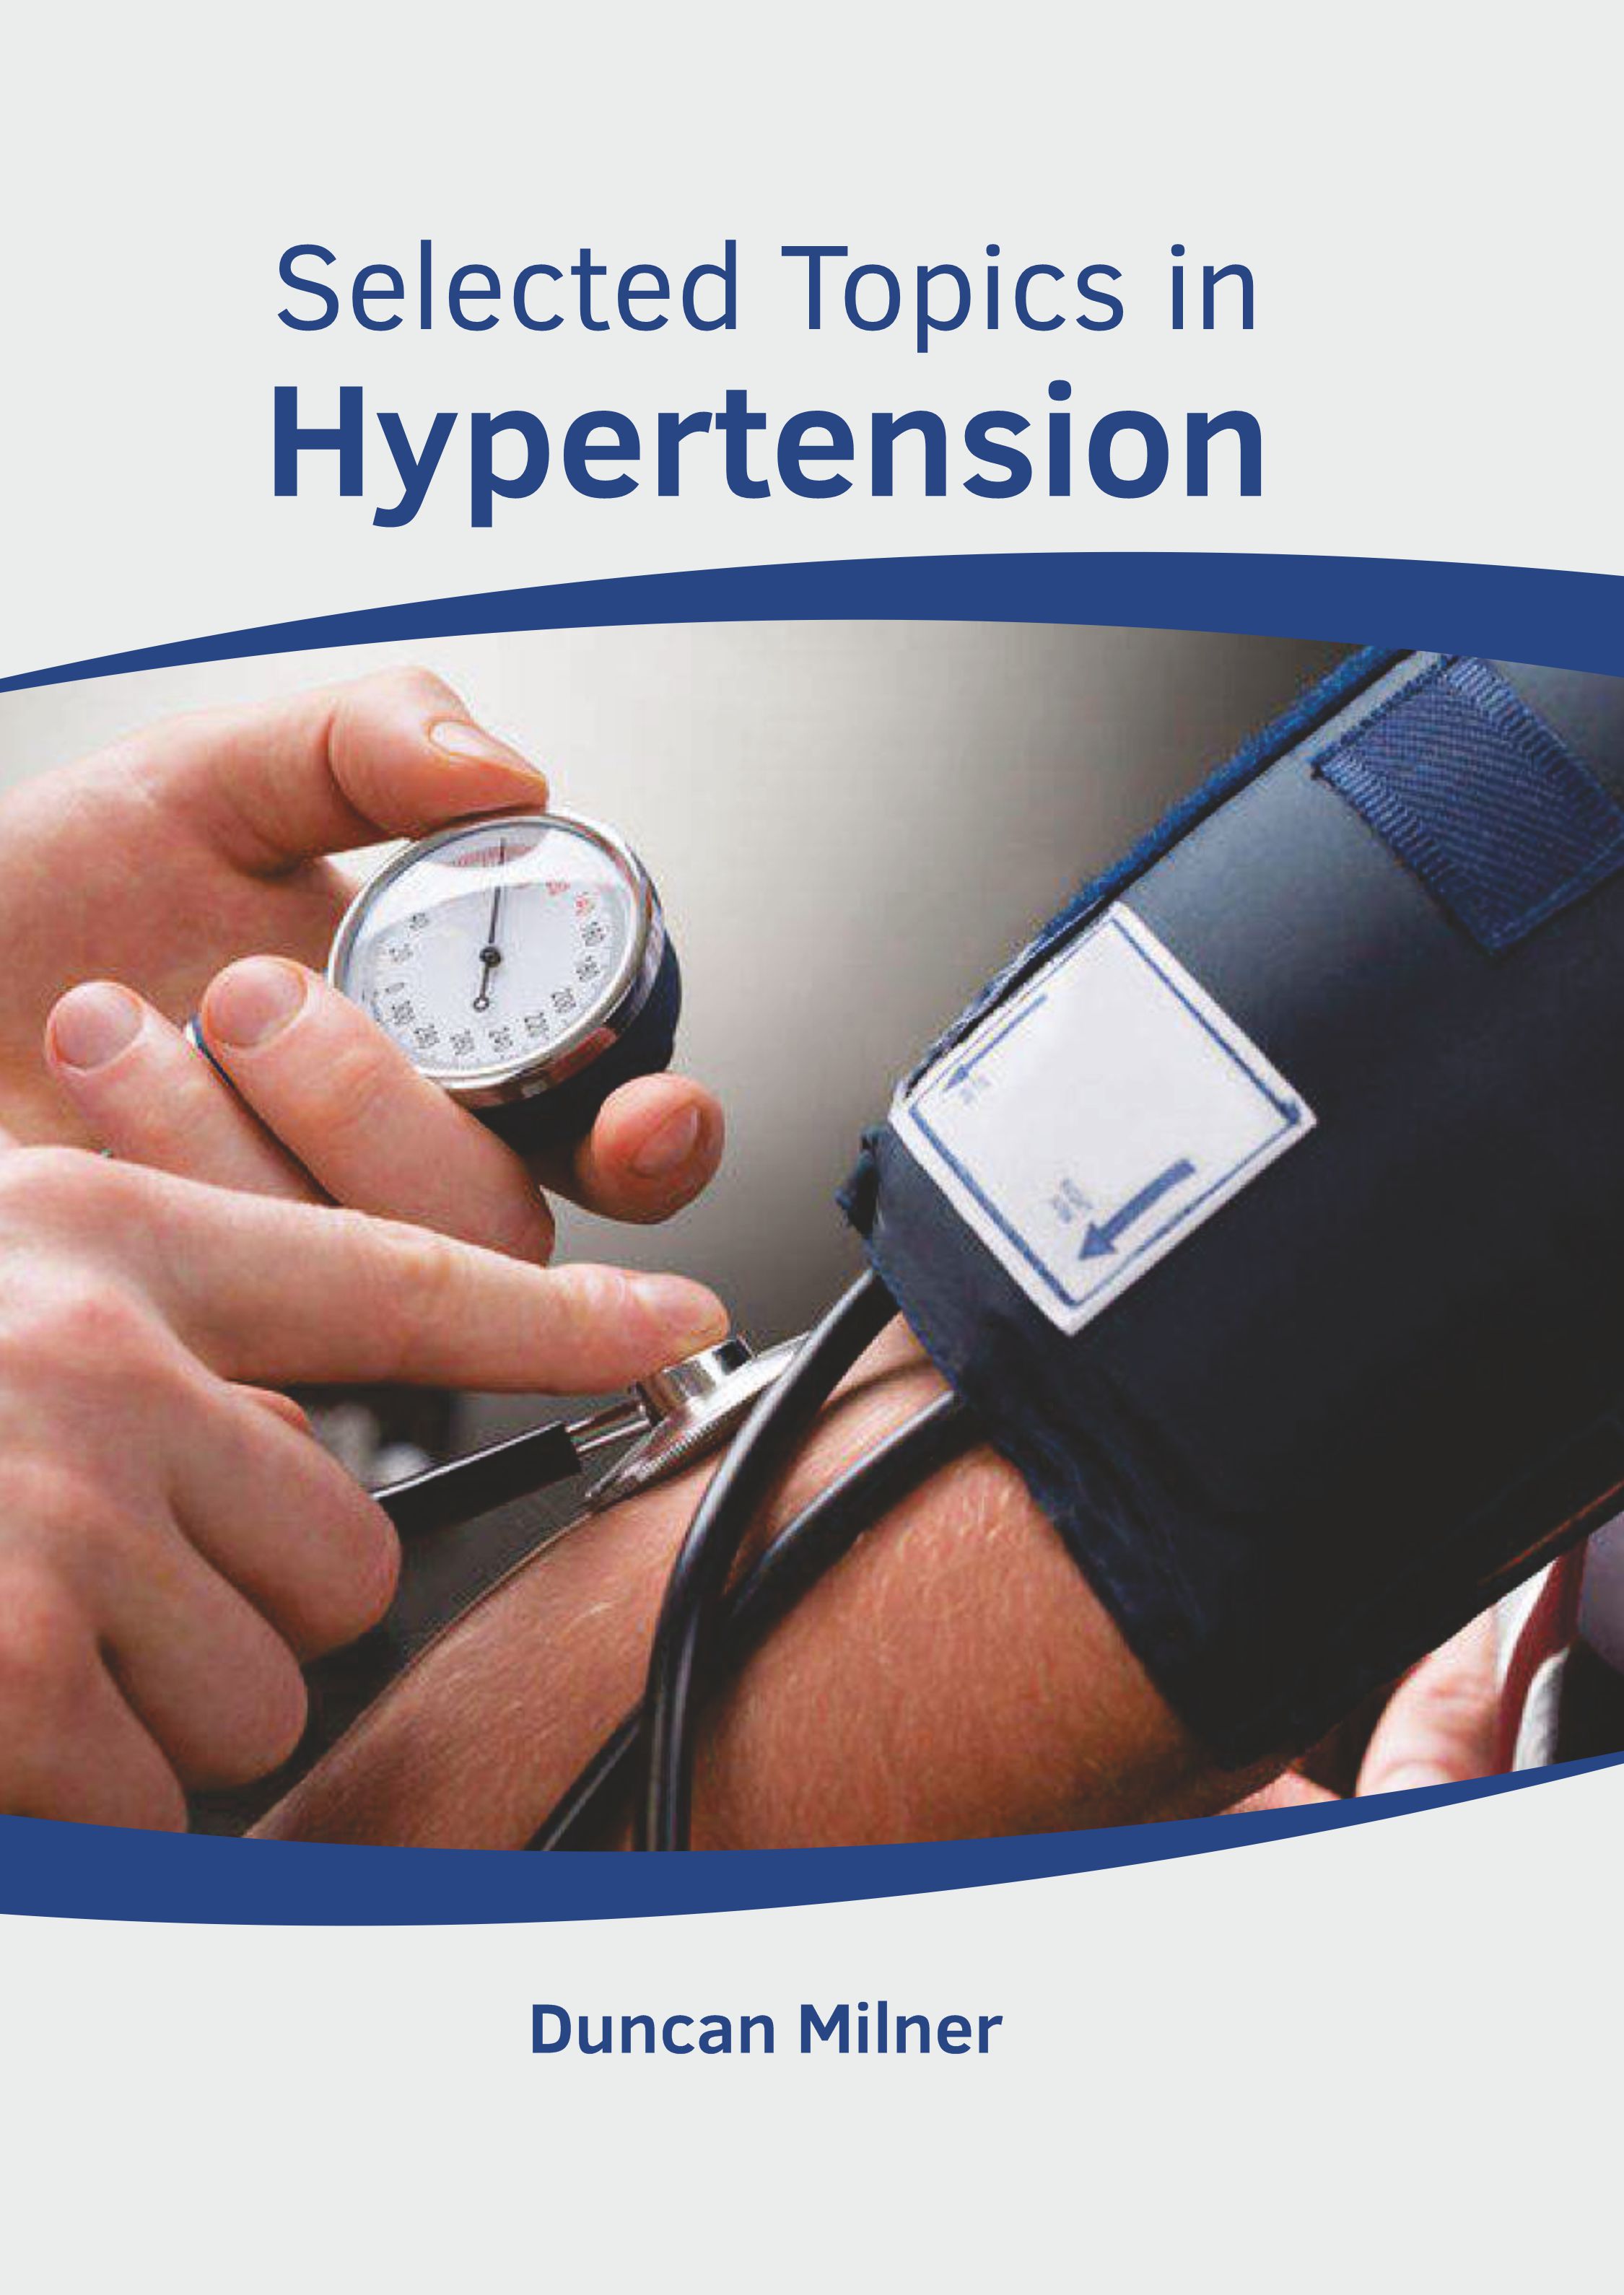 

exclusive-publishers/american-medical-publishers/selected-topics-in-hypertension-9781639270385